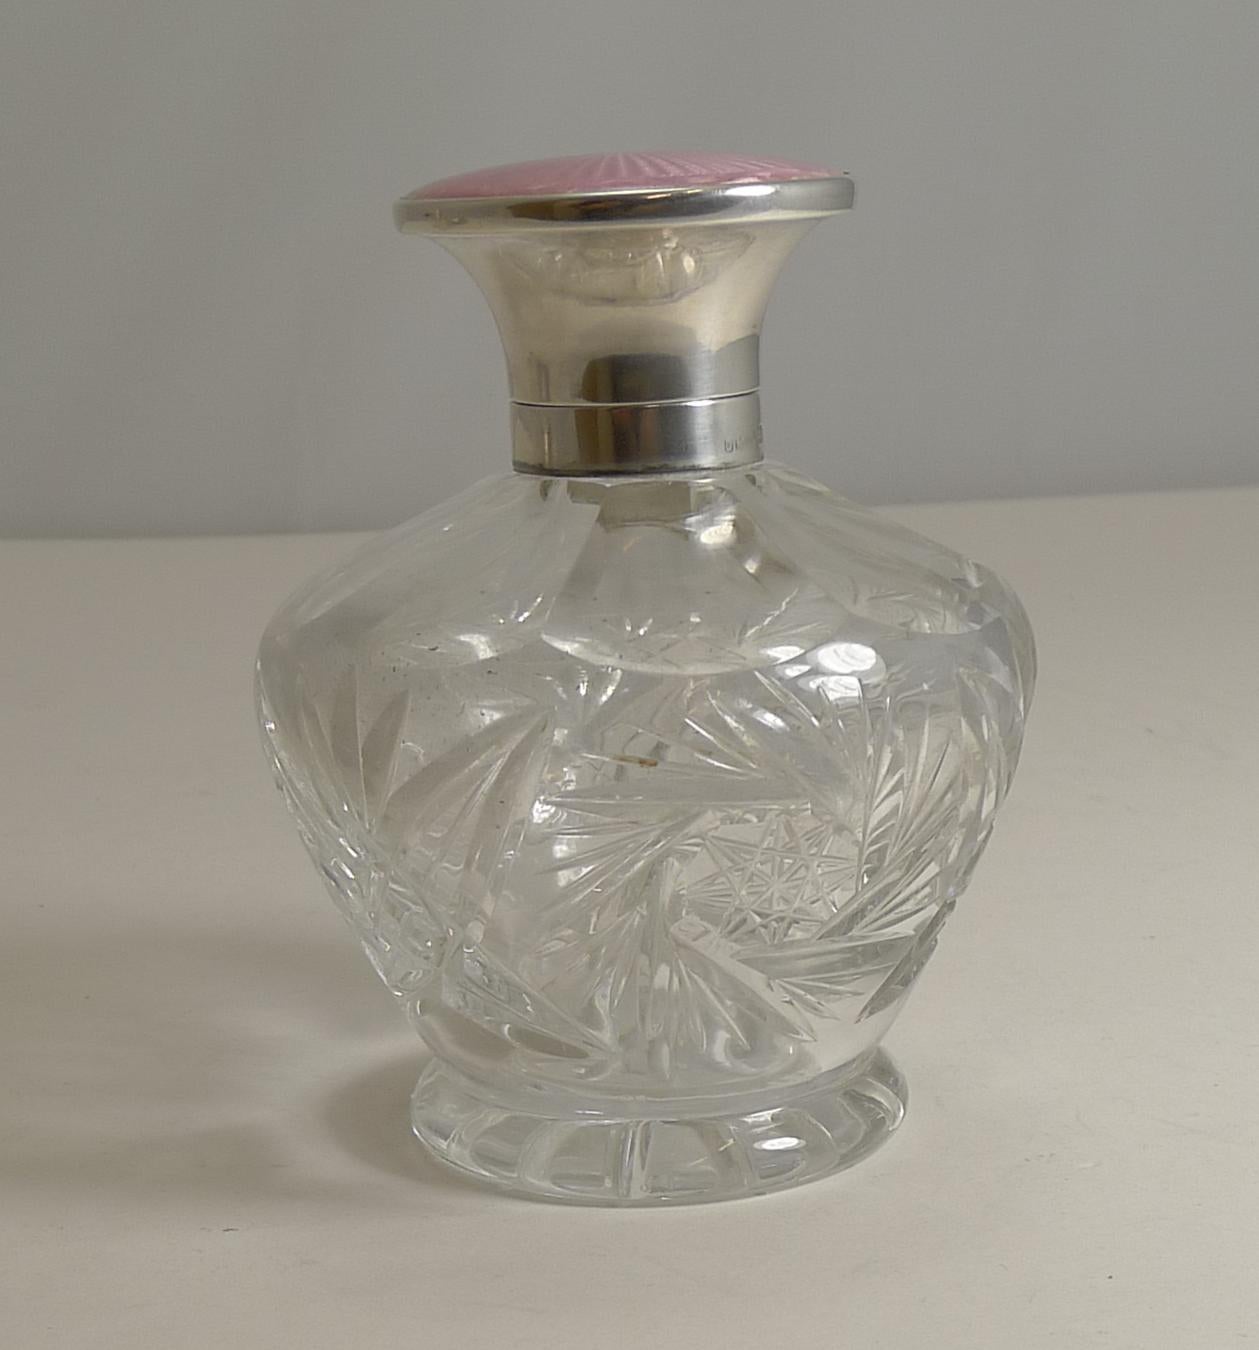 Without doubt, pink guilloche enamel is the number one desired color, hard to come by and always at a premium.

A hefty piece of English crystal has been used to create this pretty bottle, handcut in a pretty design with a star-cut to the